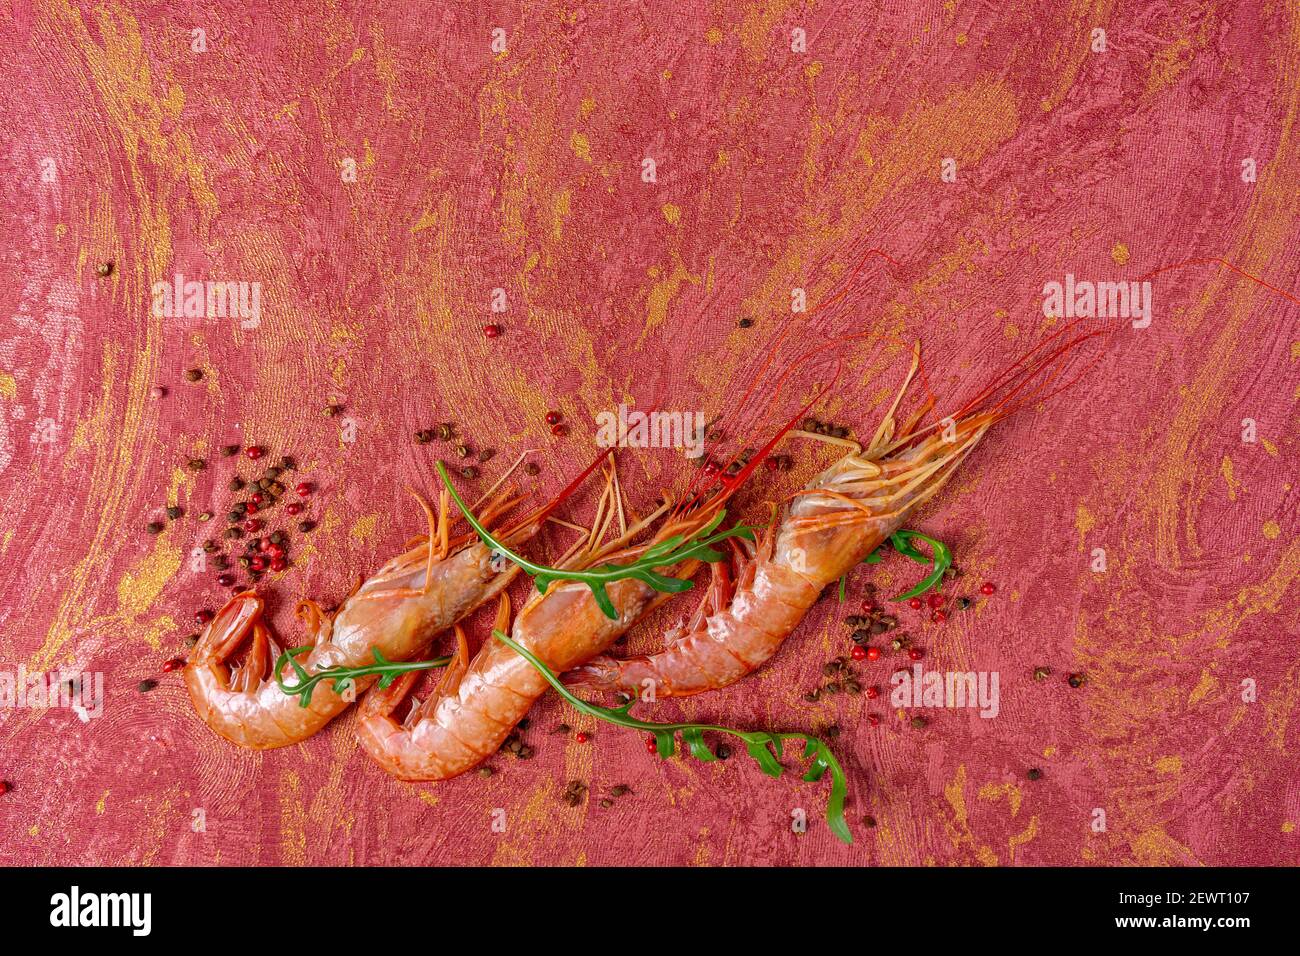 Juicy fresh shrimp seamless pattern isolated on red background. Place for your text. Shrimp seamless pattern on a red background. Seafood shrimp backg Stock Photo